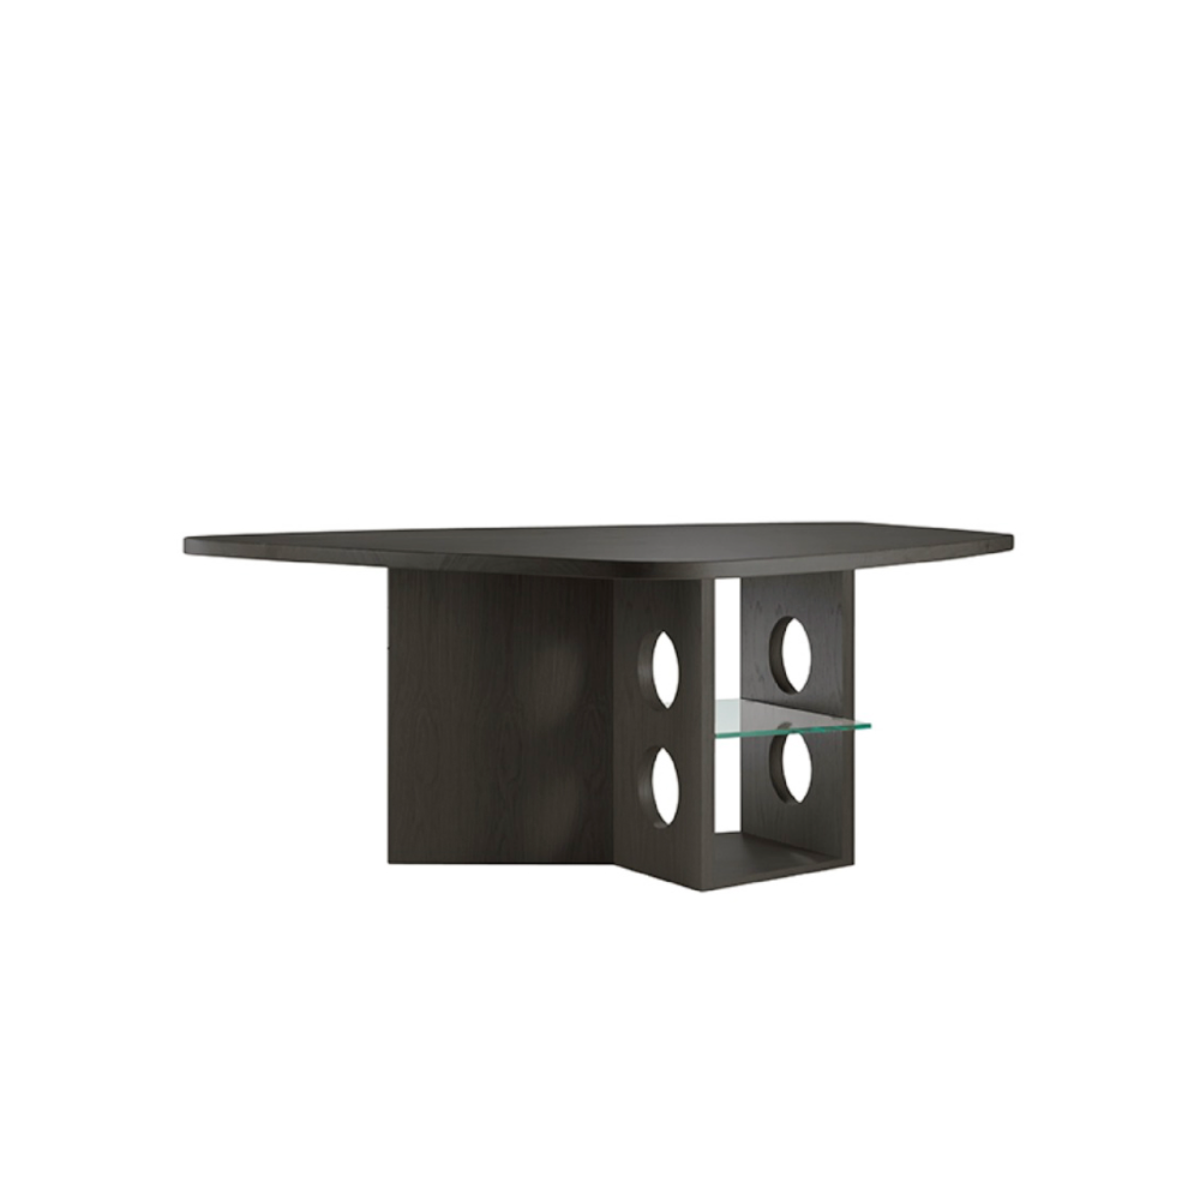 TECTA M21-1 Dining, Conference or Executive Desk - Black